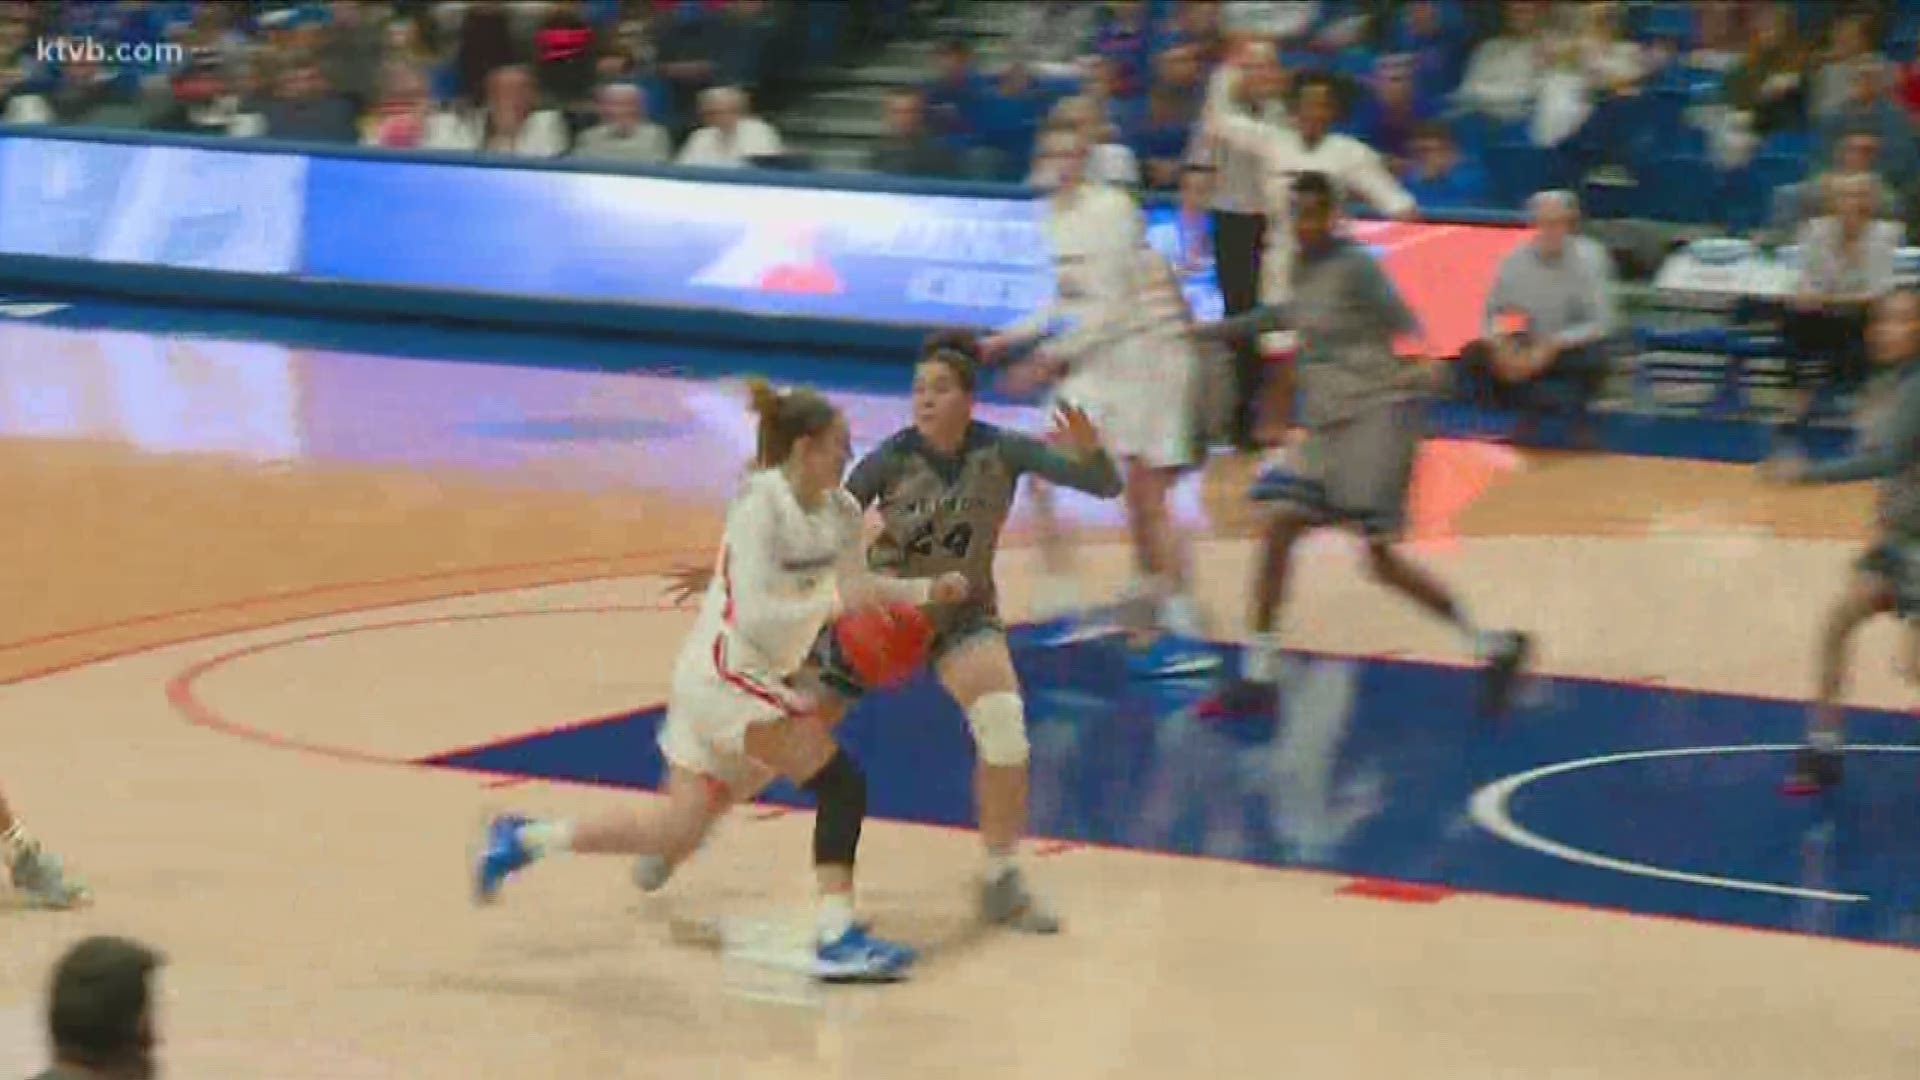 The Boise State women's basketball team )11-5, 3-1) beats Nevada 54-40 after trailing by 6 at halftime. Braydey Hodgins leads the way with 17 points.